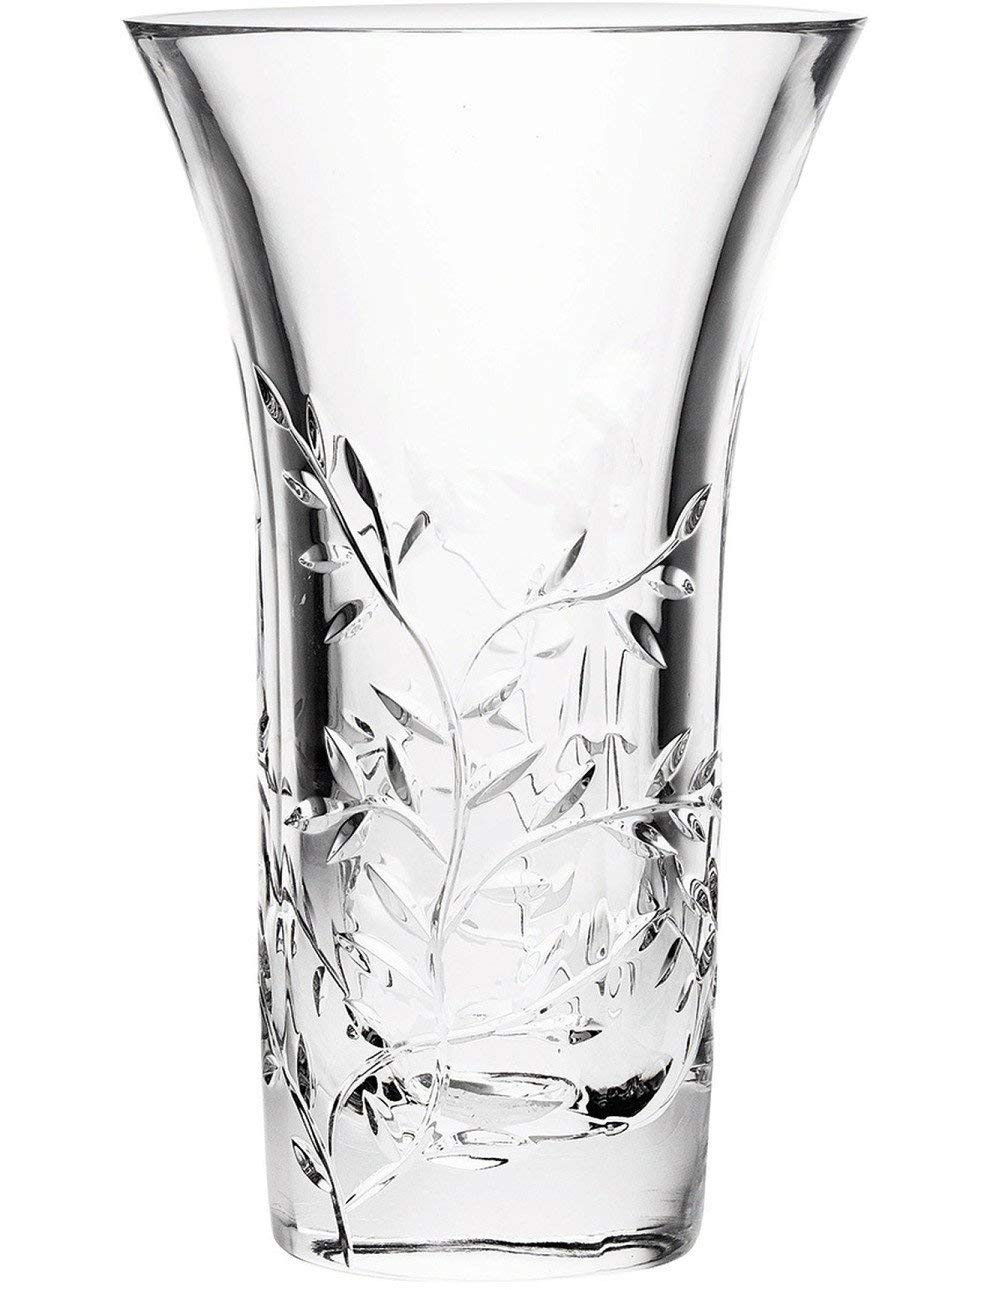 11 Lovable Marquis by Waterford Sheridan Flared 11 Crystal Vase 2024 free download marquis by waterford sheridan flared 11 crystal vase of amazon com wedgwood vera leaf vase home kitchen throughout 71dkl5kjq l sl1290